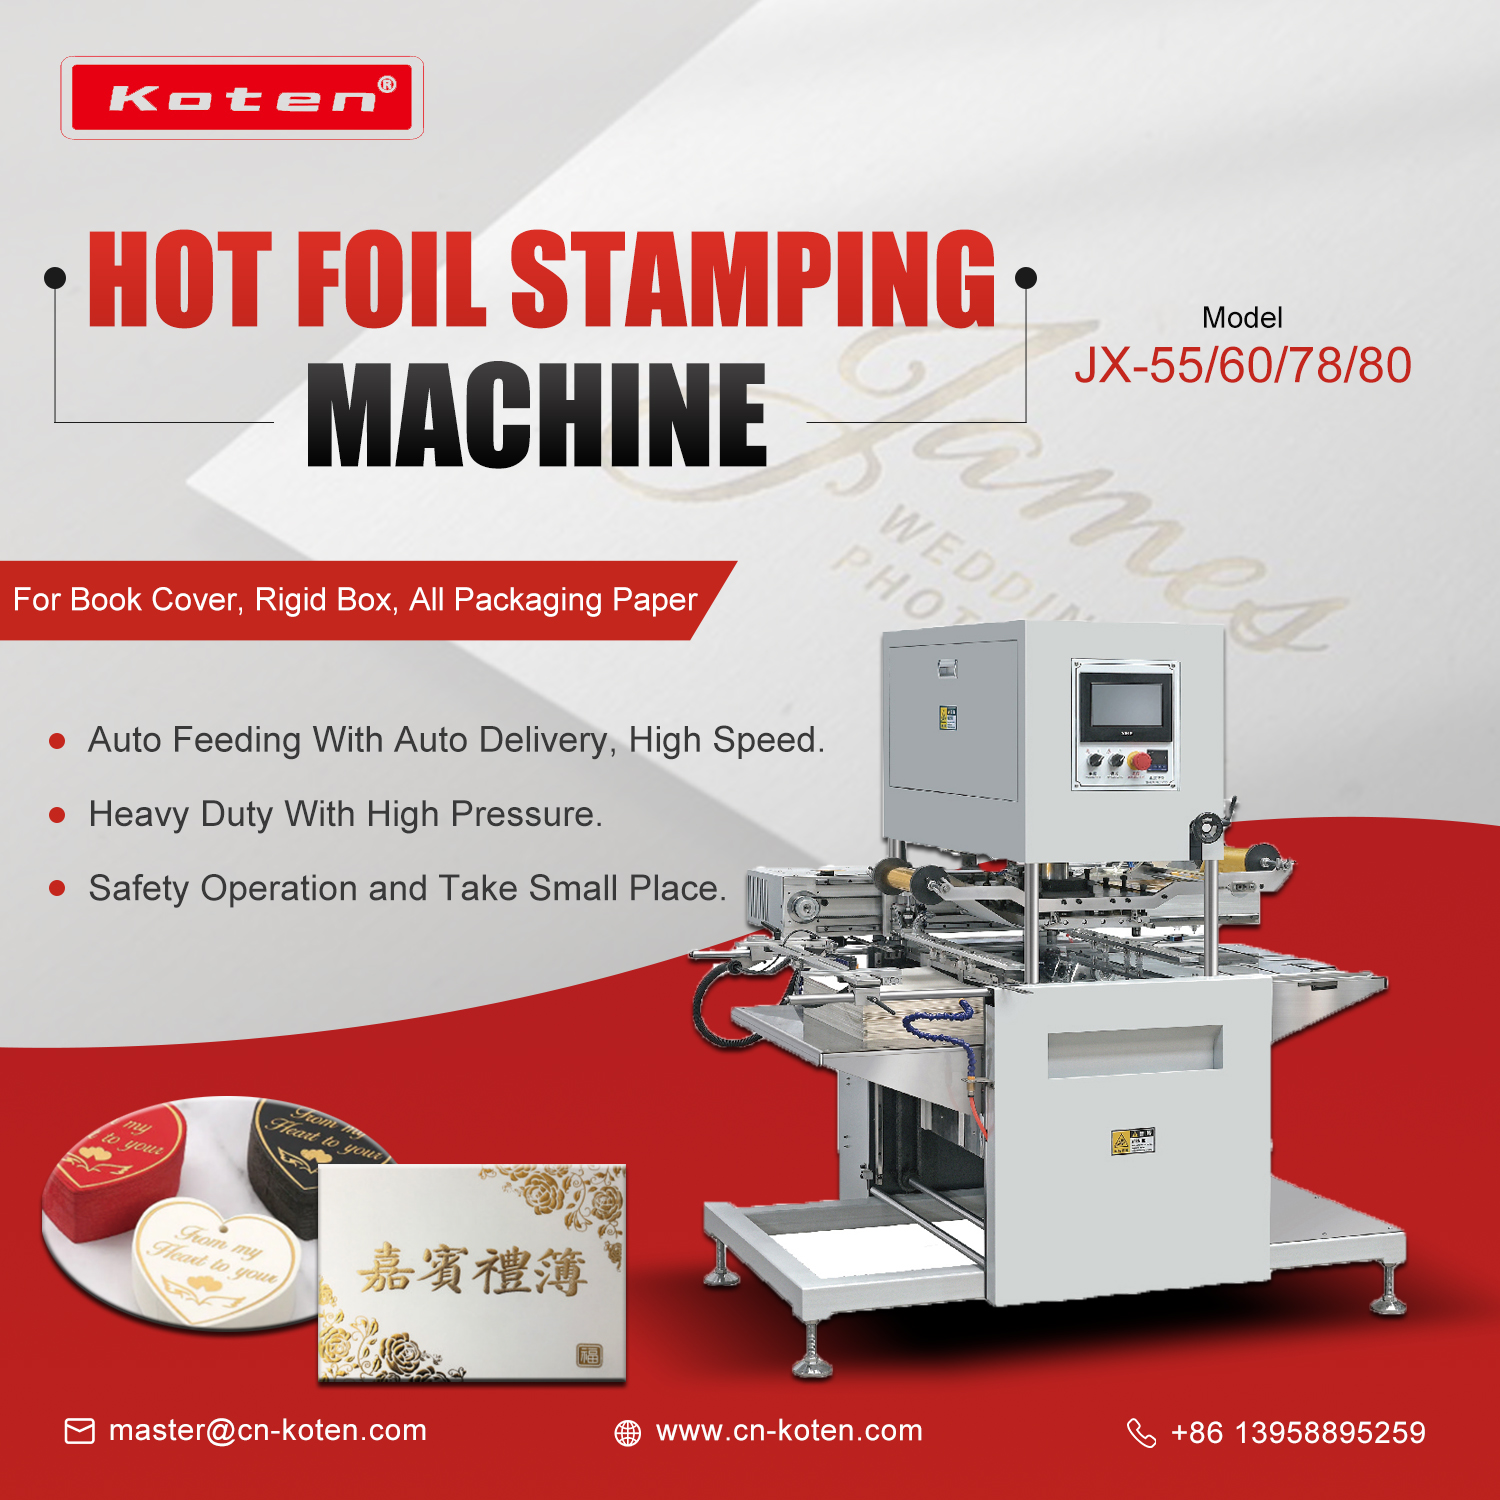 Hot Foil Stamping Machine For Book Cover Or Rigid Boxes